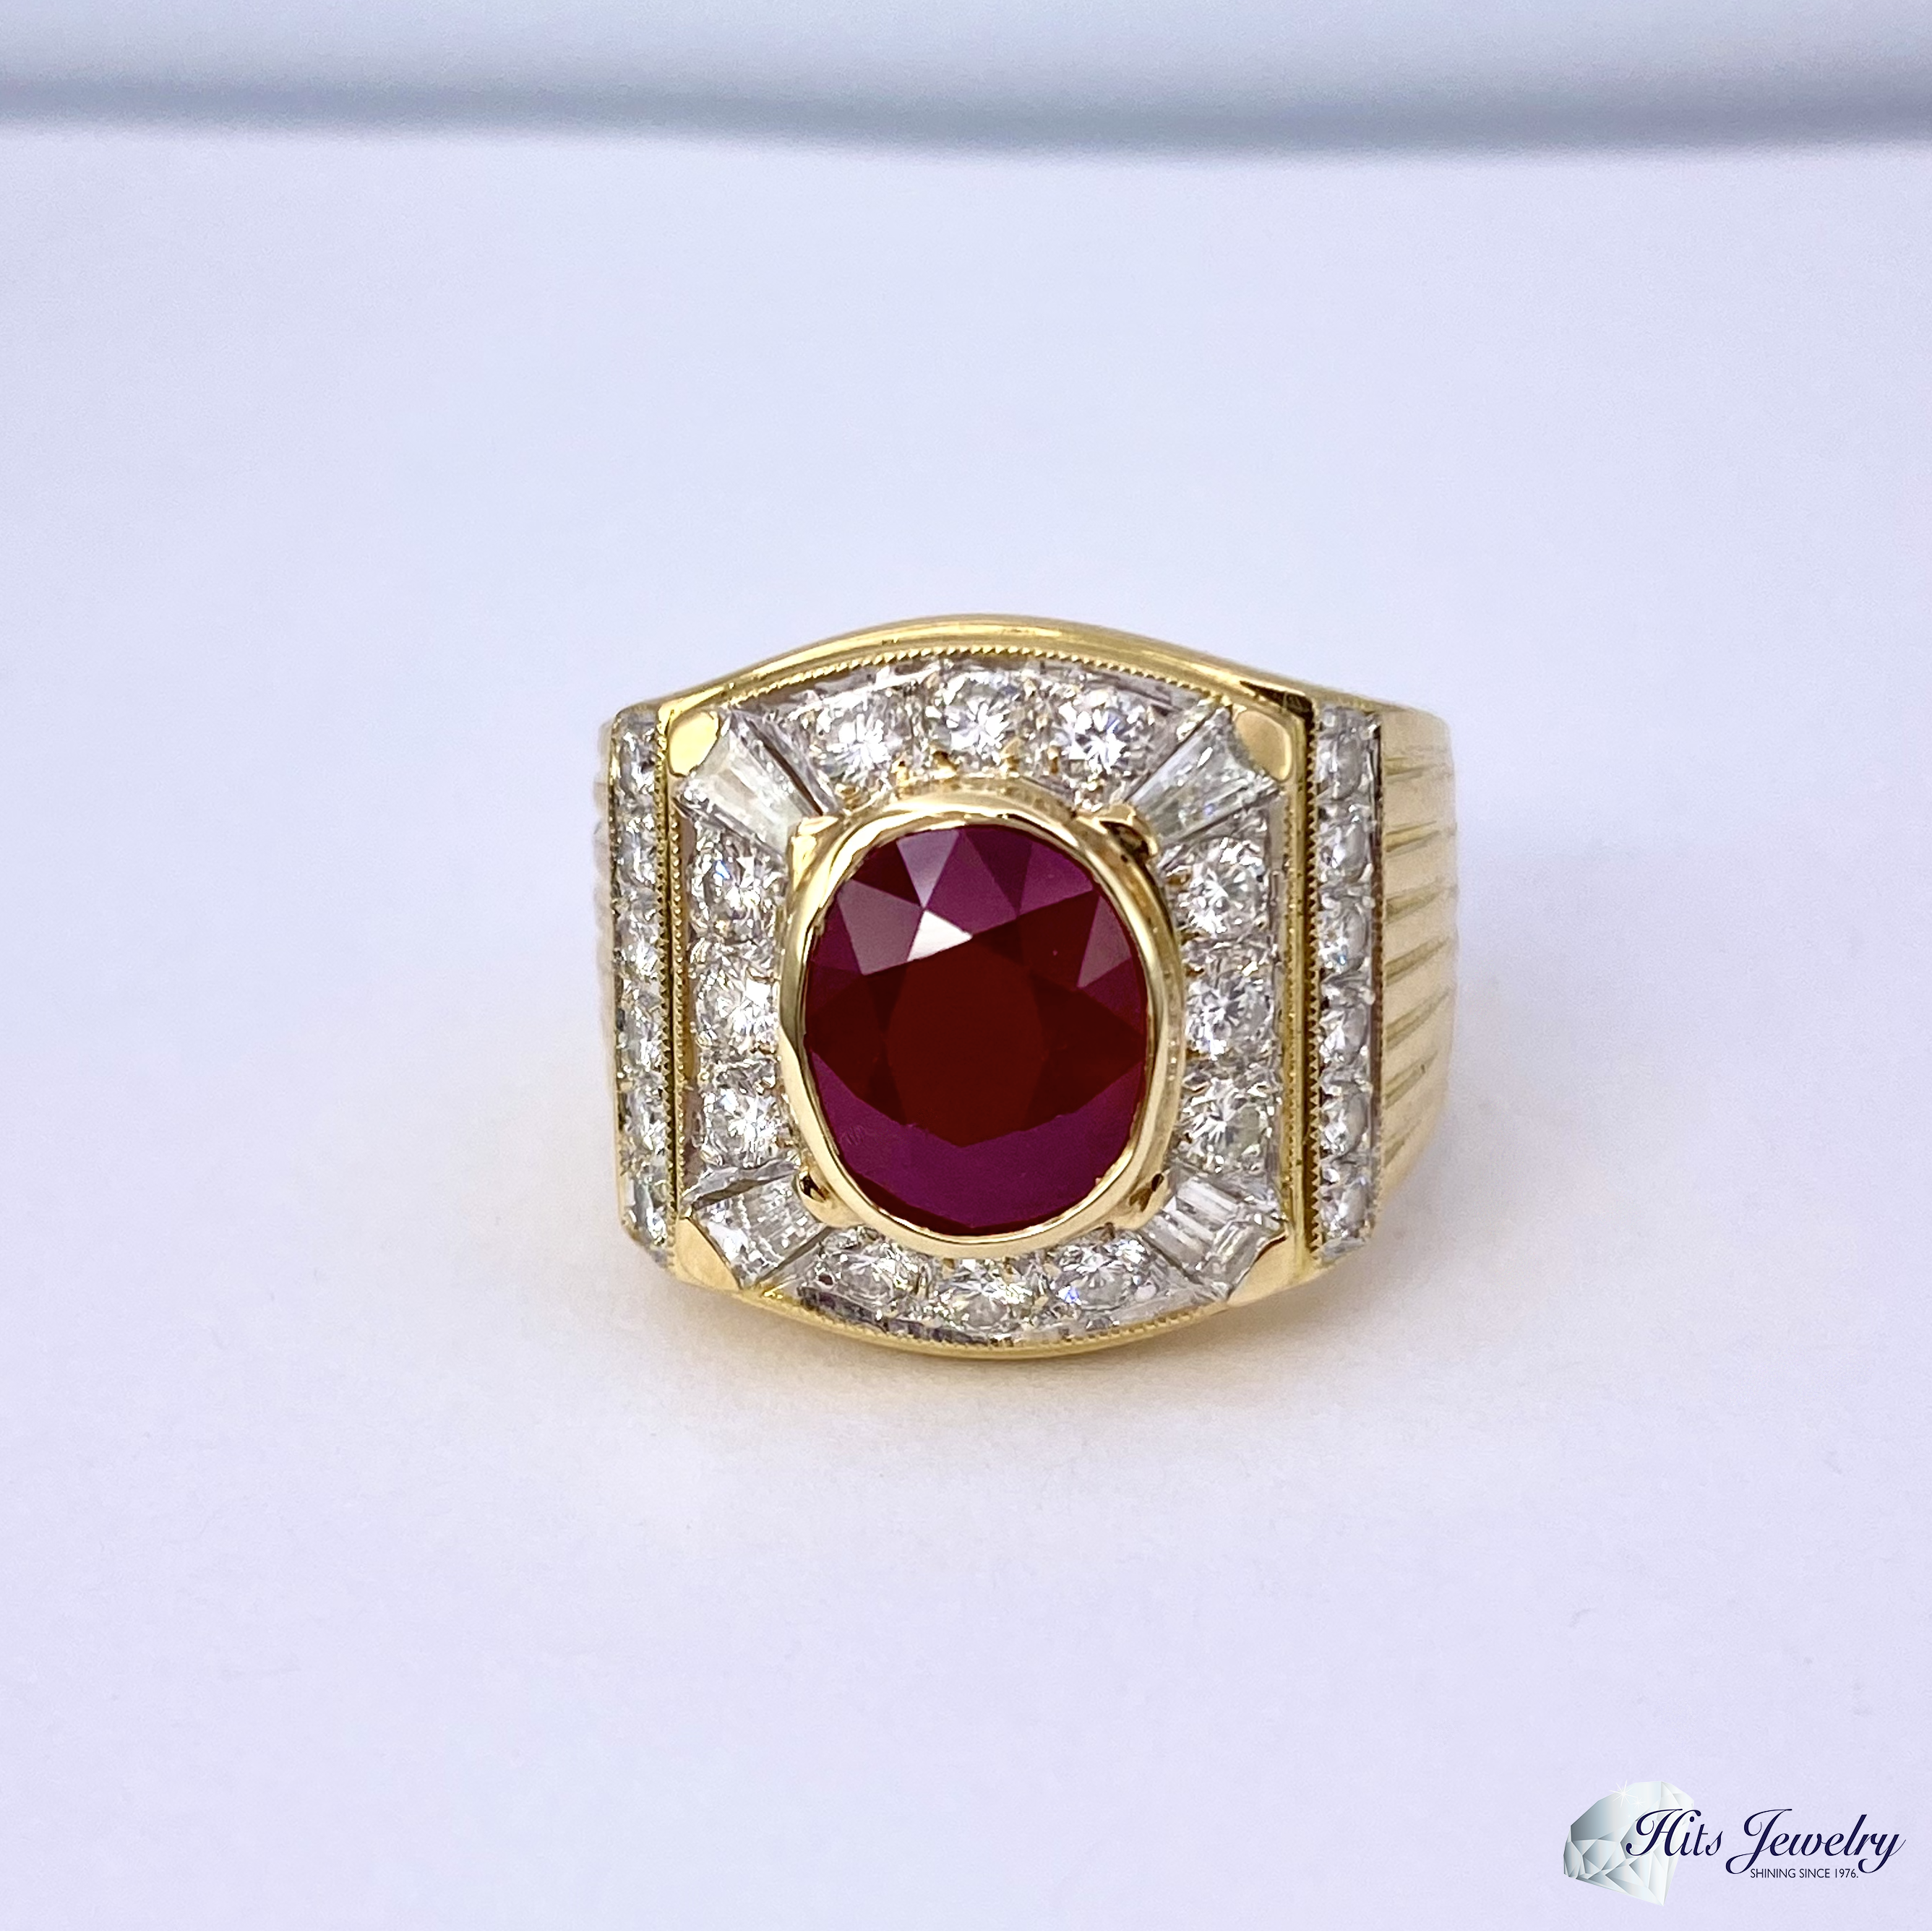 14K Solid Gold Men's Diamond Ruby Ring 3.50 Cwt. – Avianne Jewelers